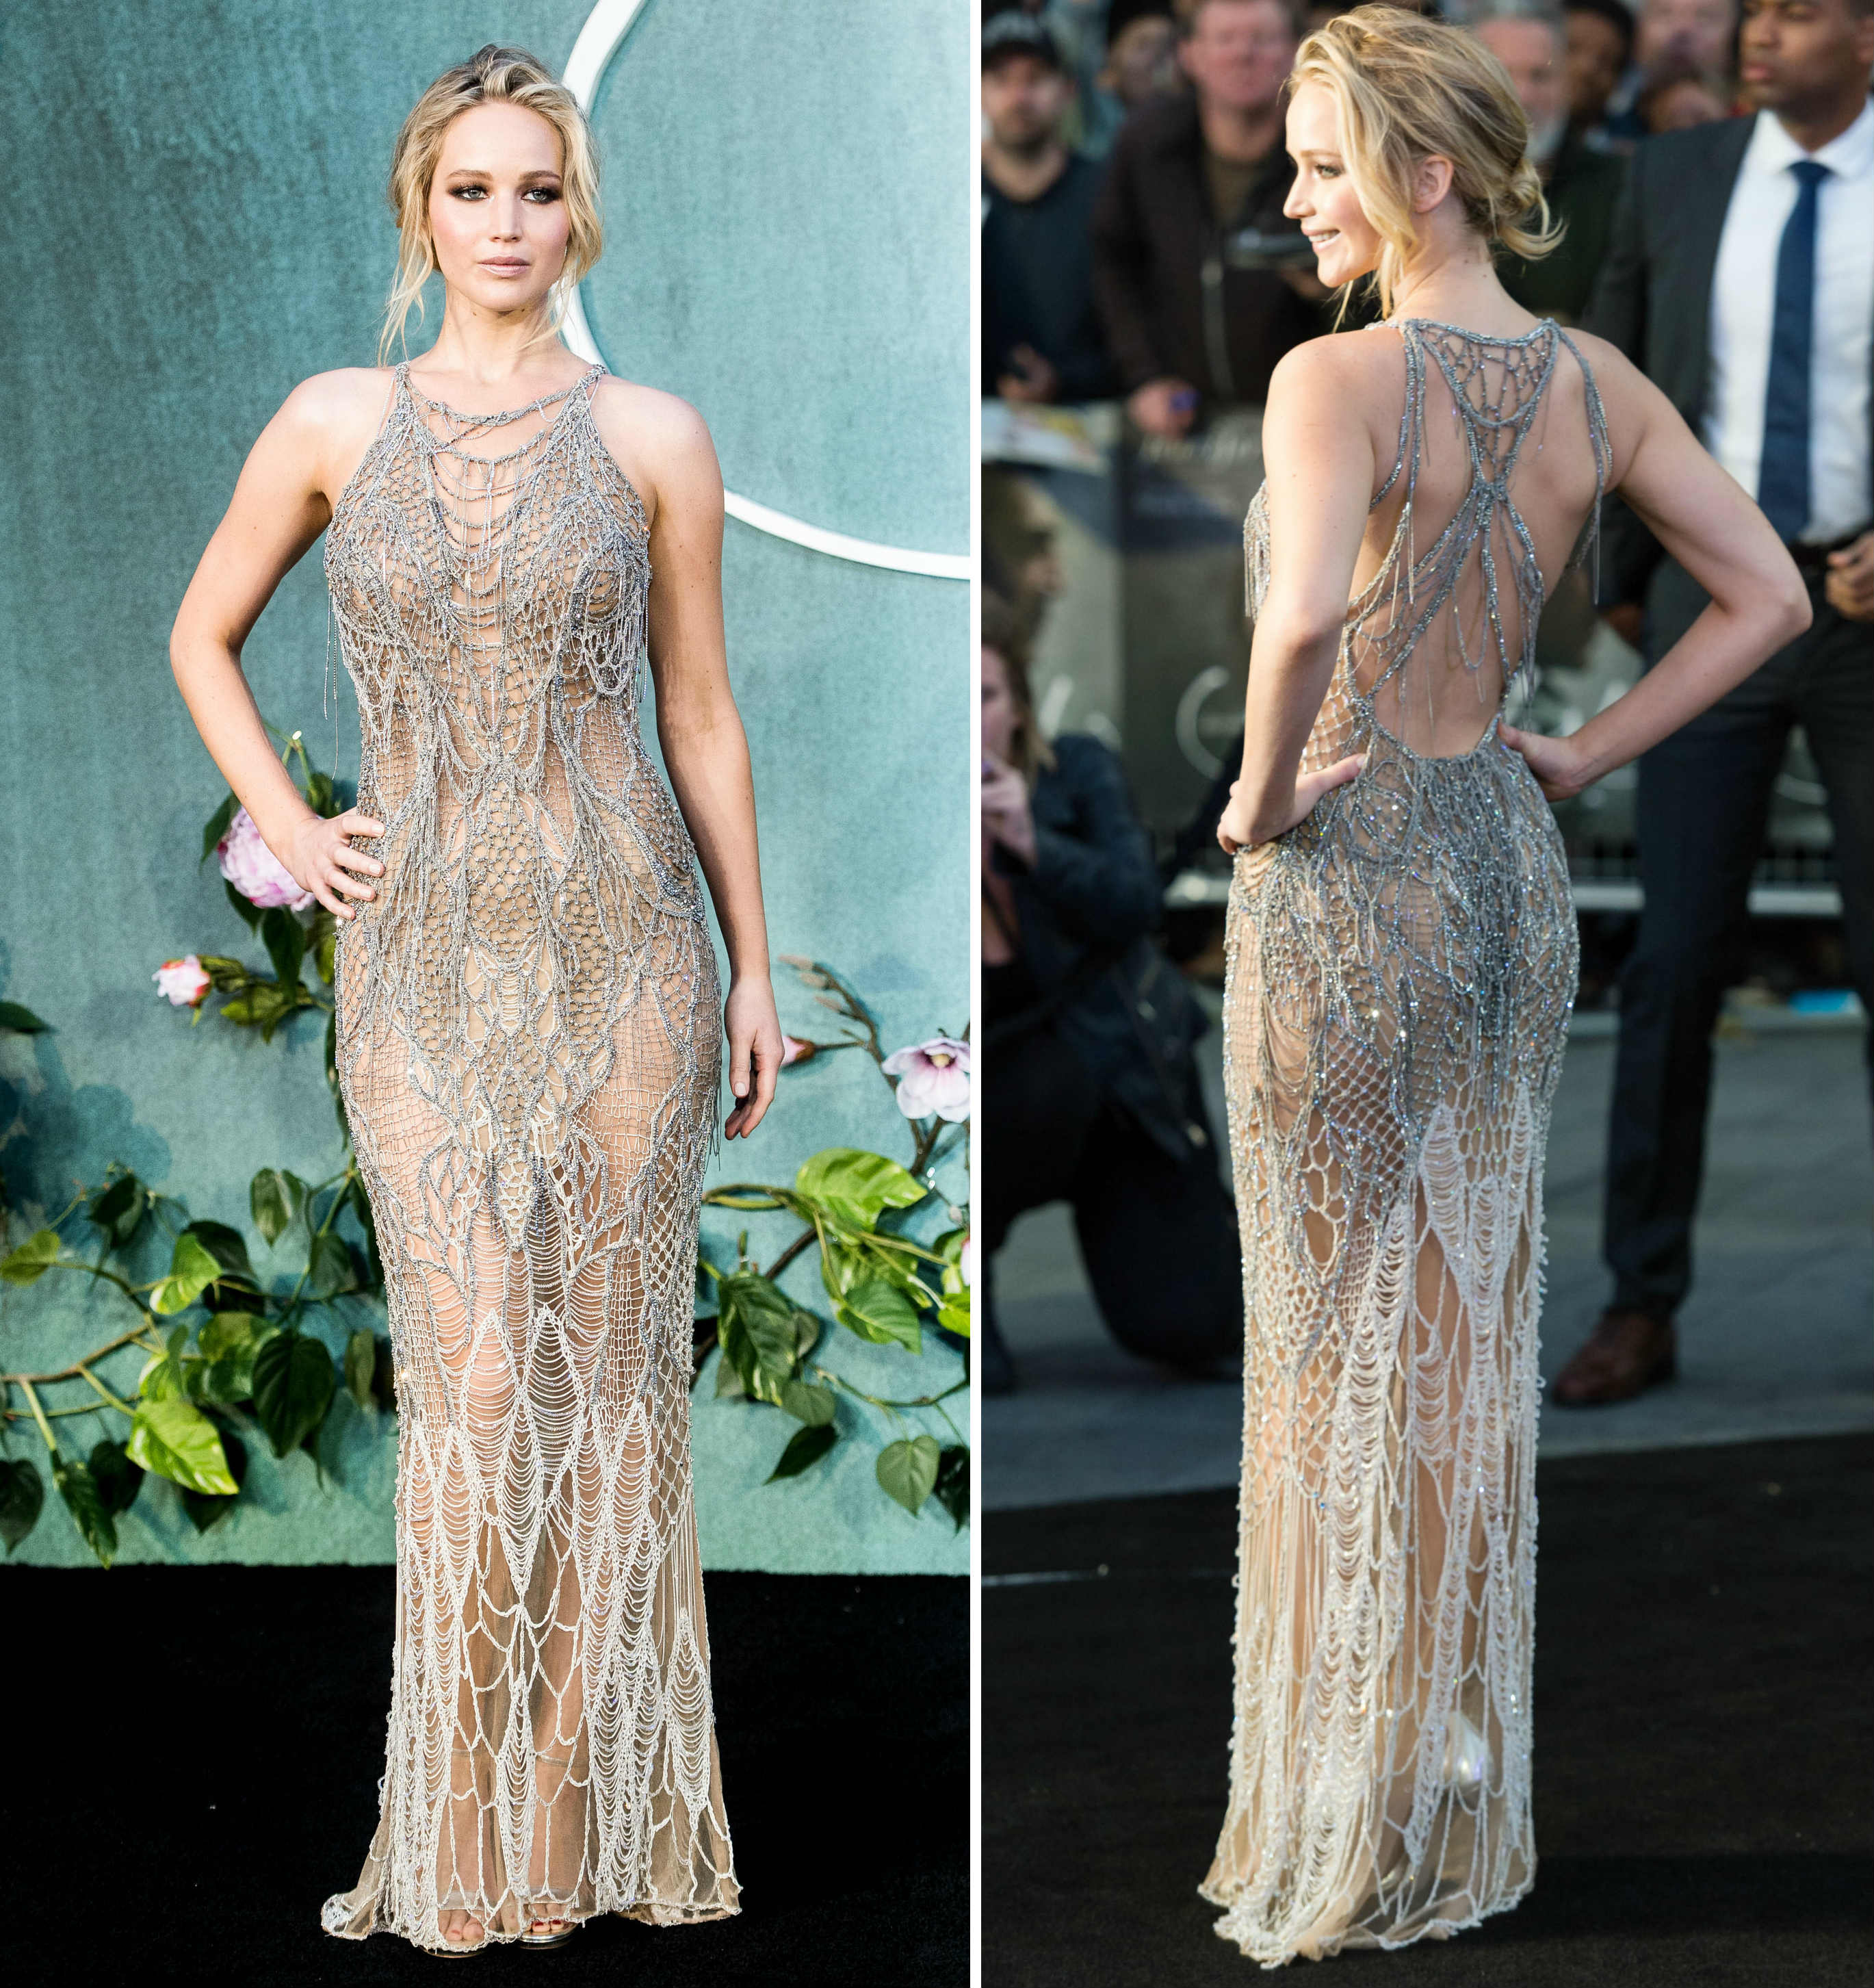 Jennifer Lawrence Stuns In Sheer Fishnet Gown At London Mother